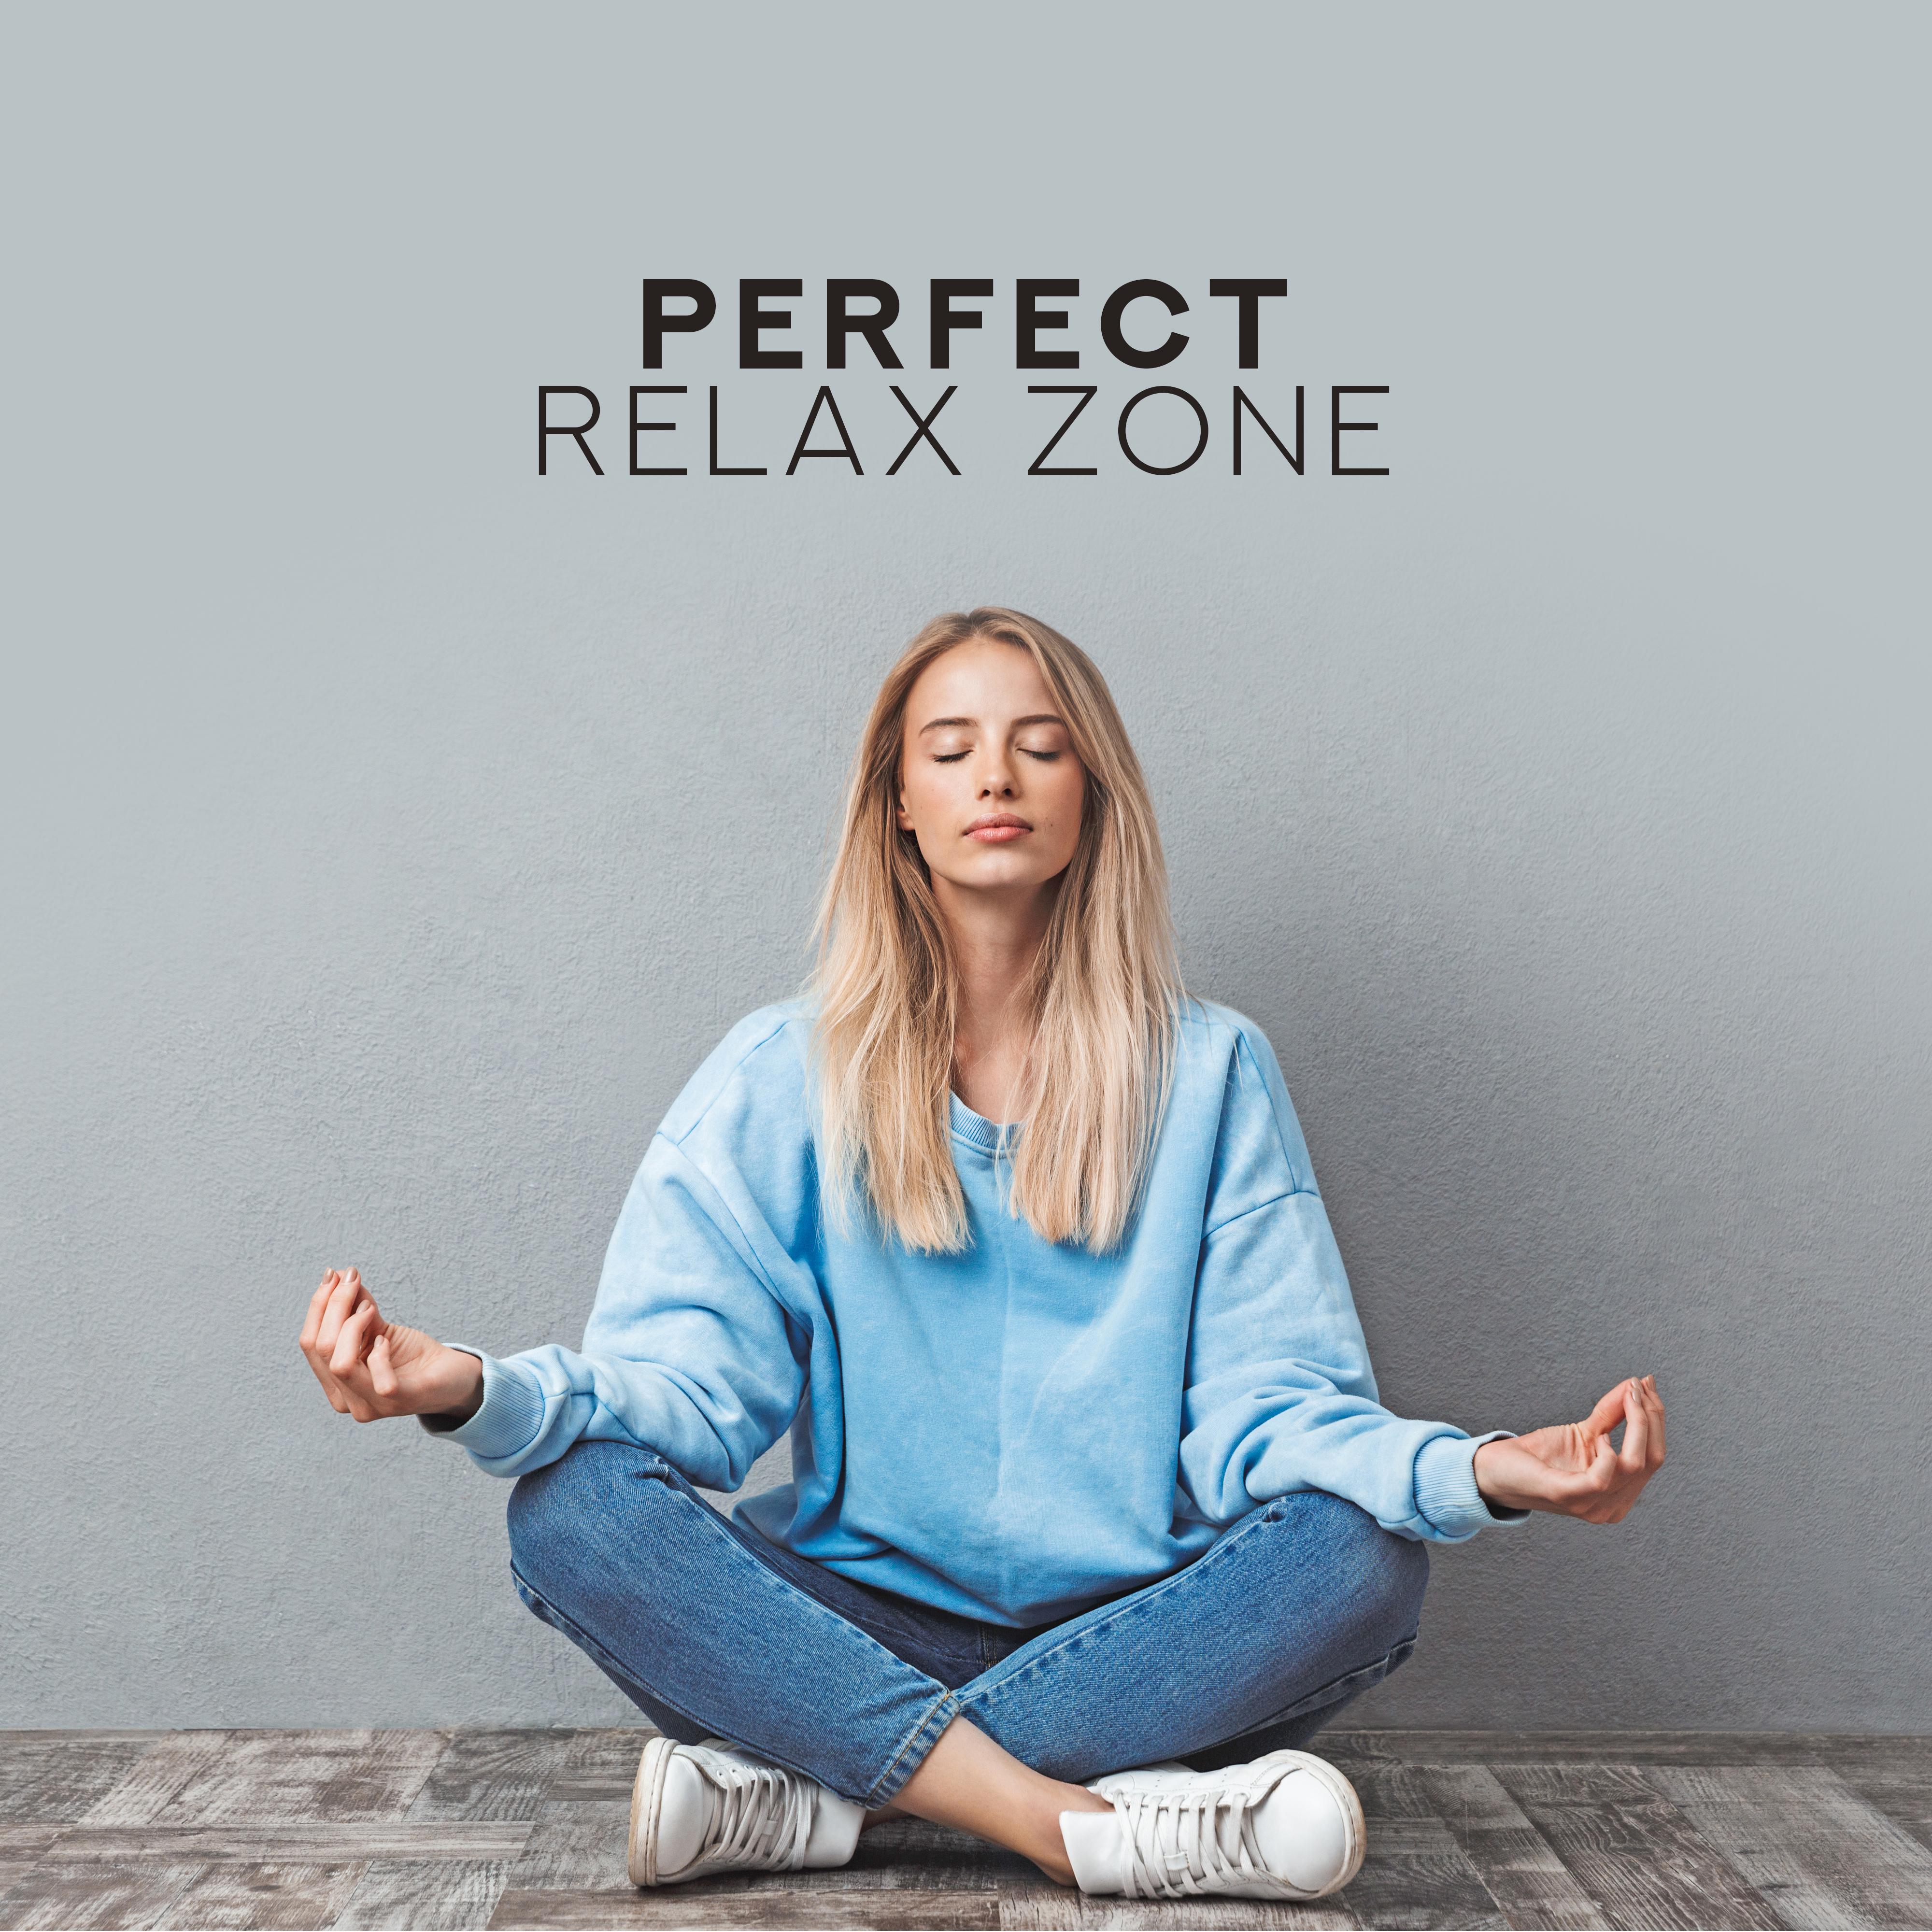 Perfect Relax Zone – Soothing Sounds for Meditation, Relaxation, Yoga for Bedtime, Pure Zen, Relaxing Therapy, Chakra Balancing, Stress Relief